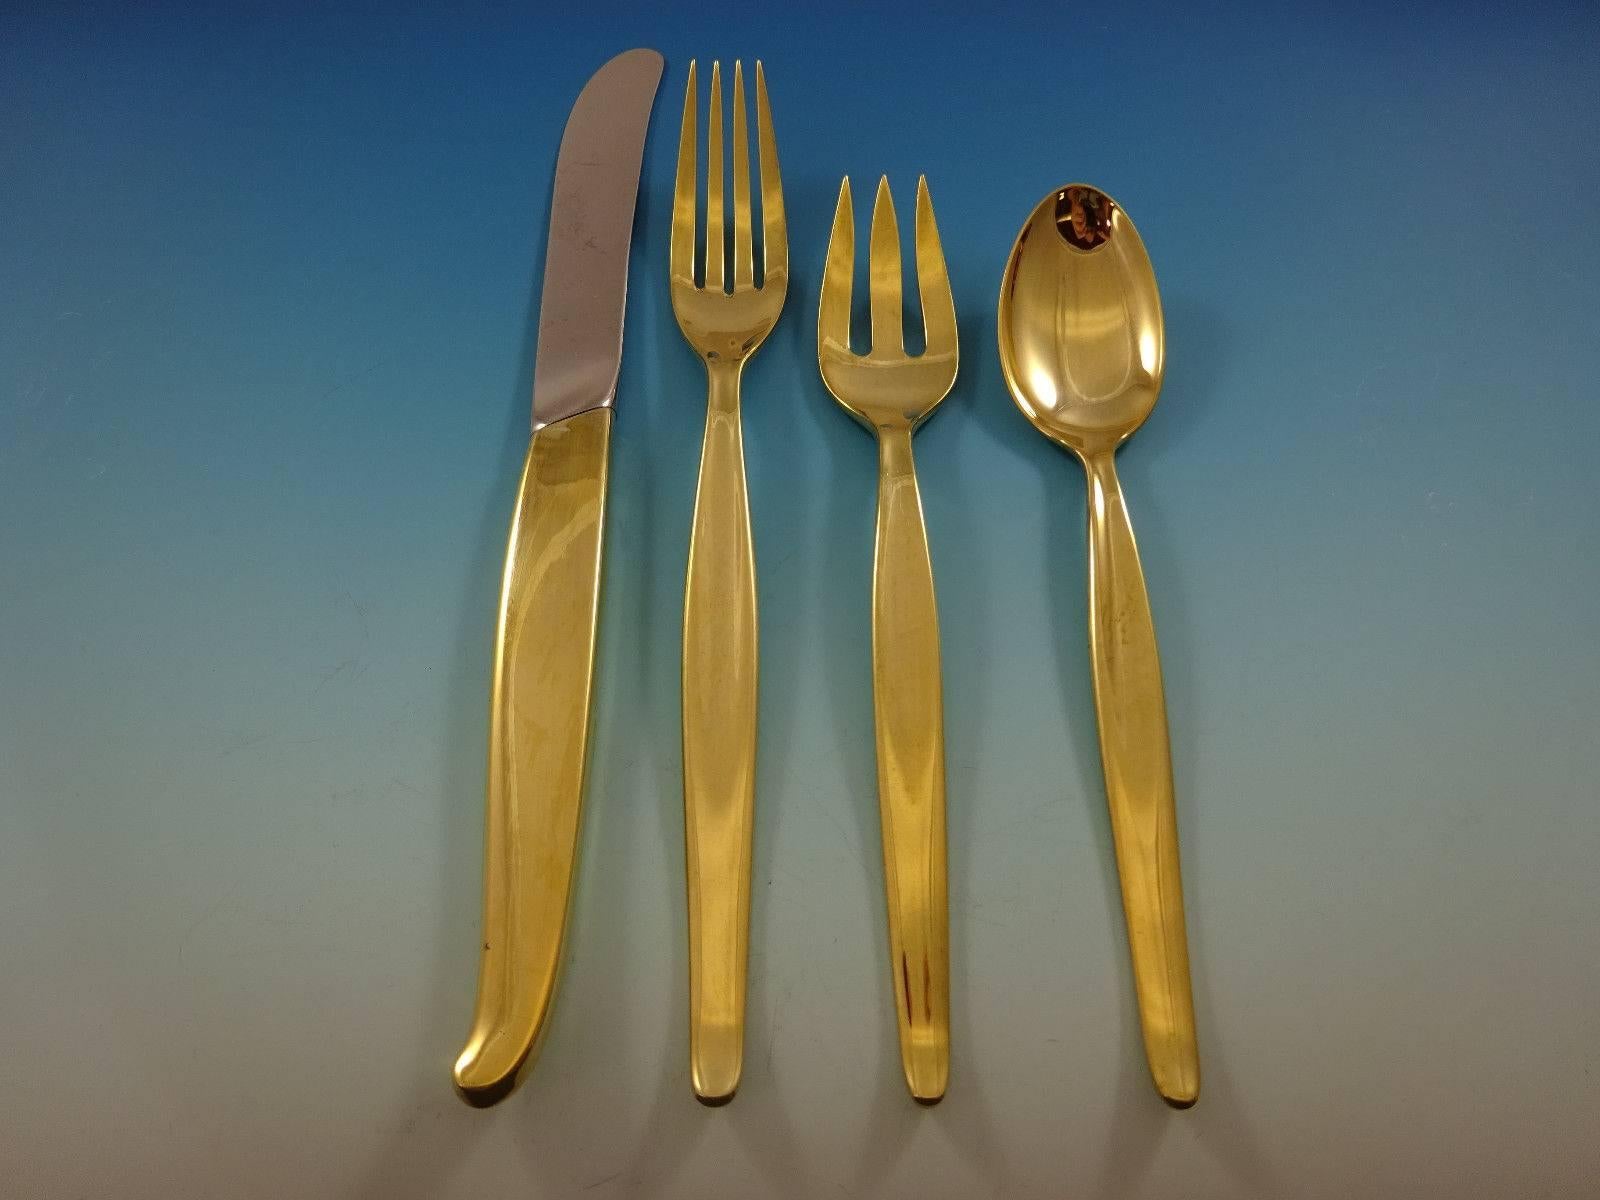 Gorgeous contour gold by Towle sterling silver flatware set - 48 pieces. Gold flatware is on trend and makes a bold statement on your table. This set is vermeil (completely gold-washed over sterling silver) and includes:

12 knives, 8 7/8